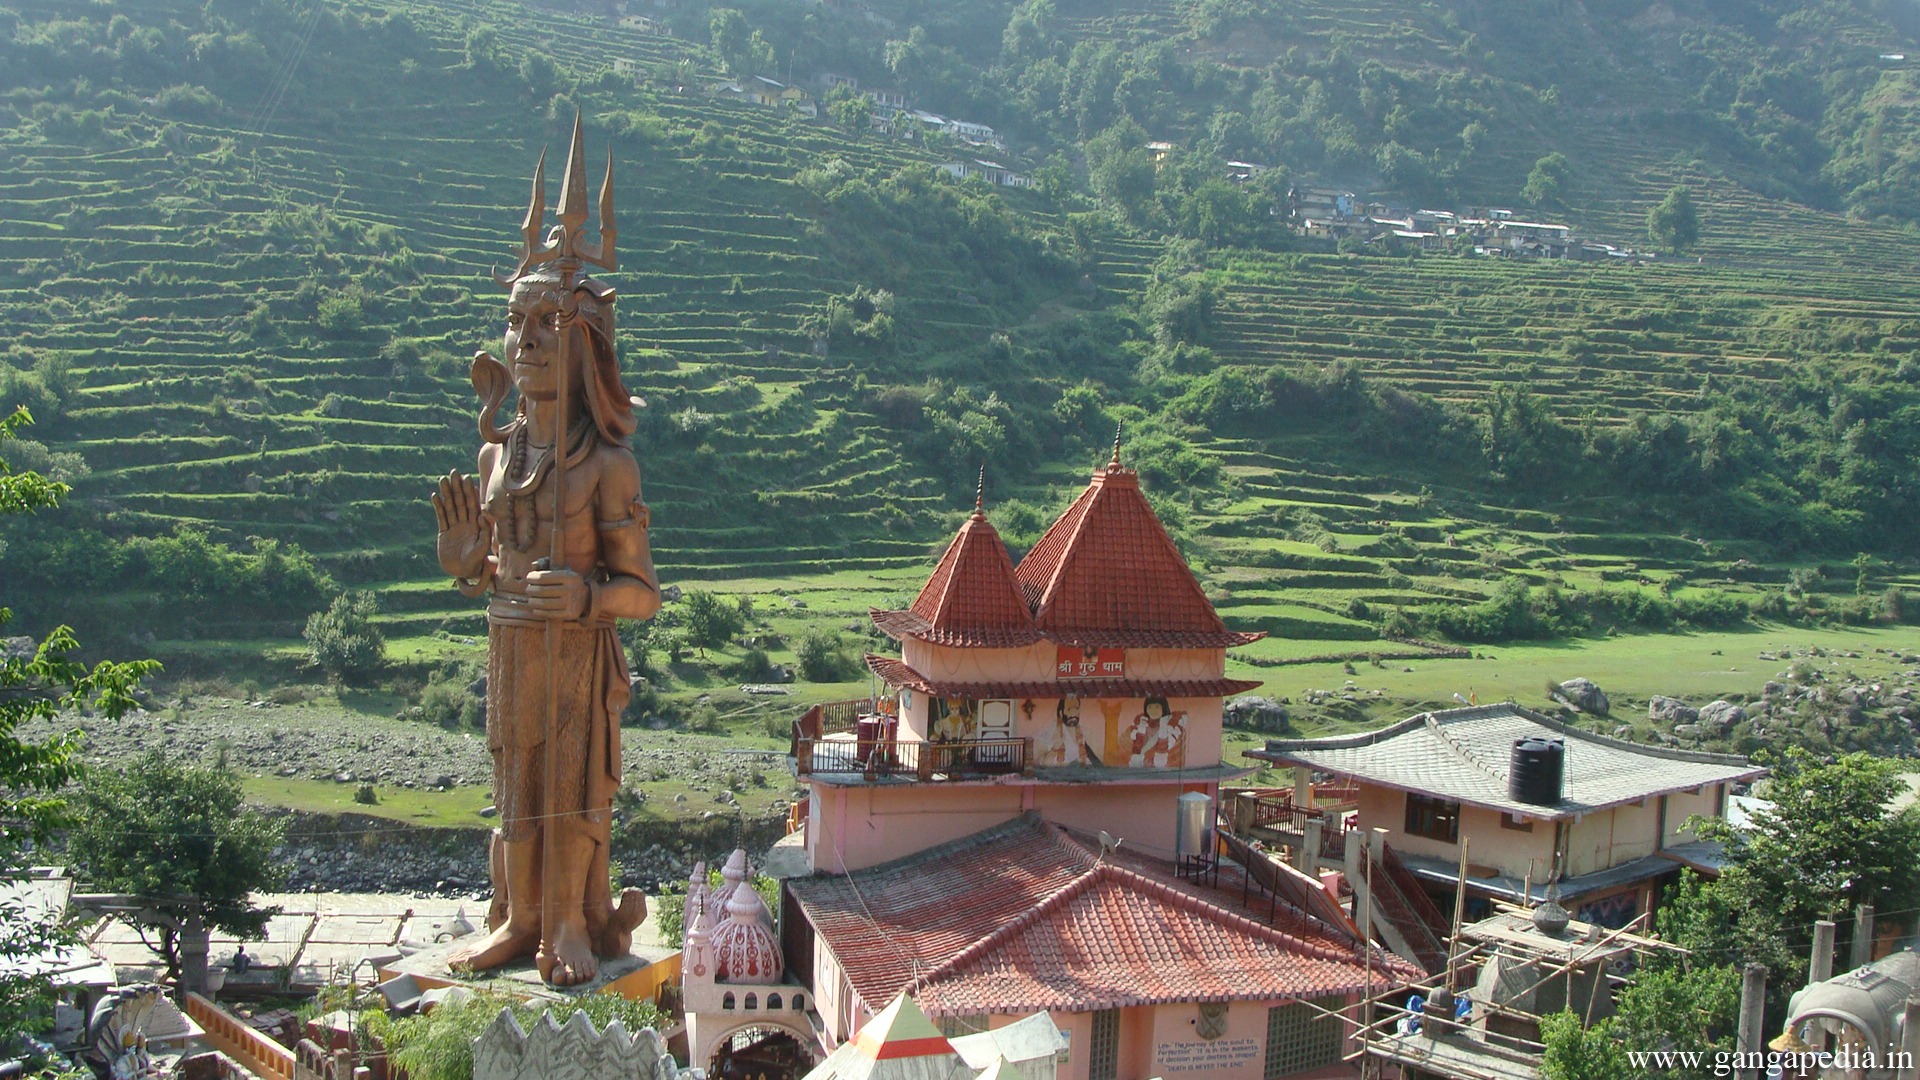 uttarkashi temple and mountains on the background